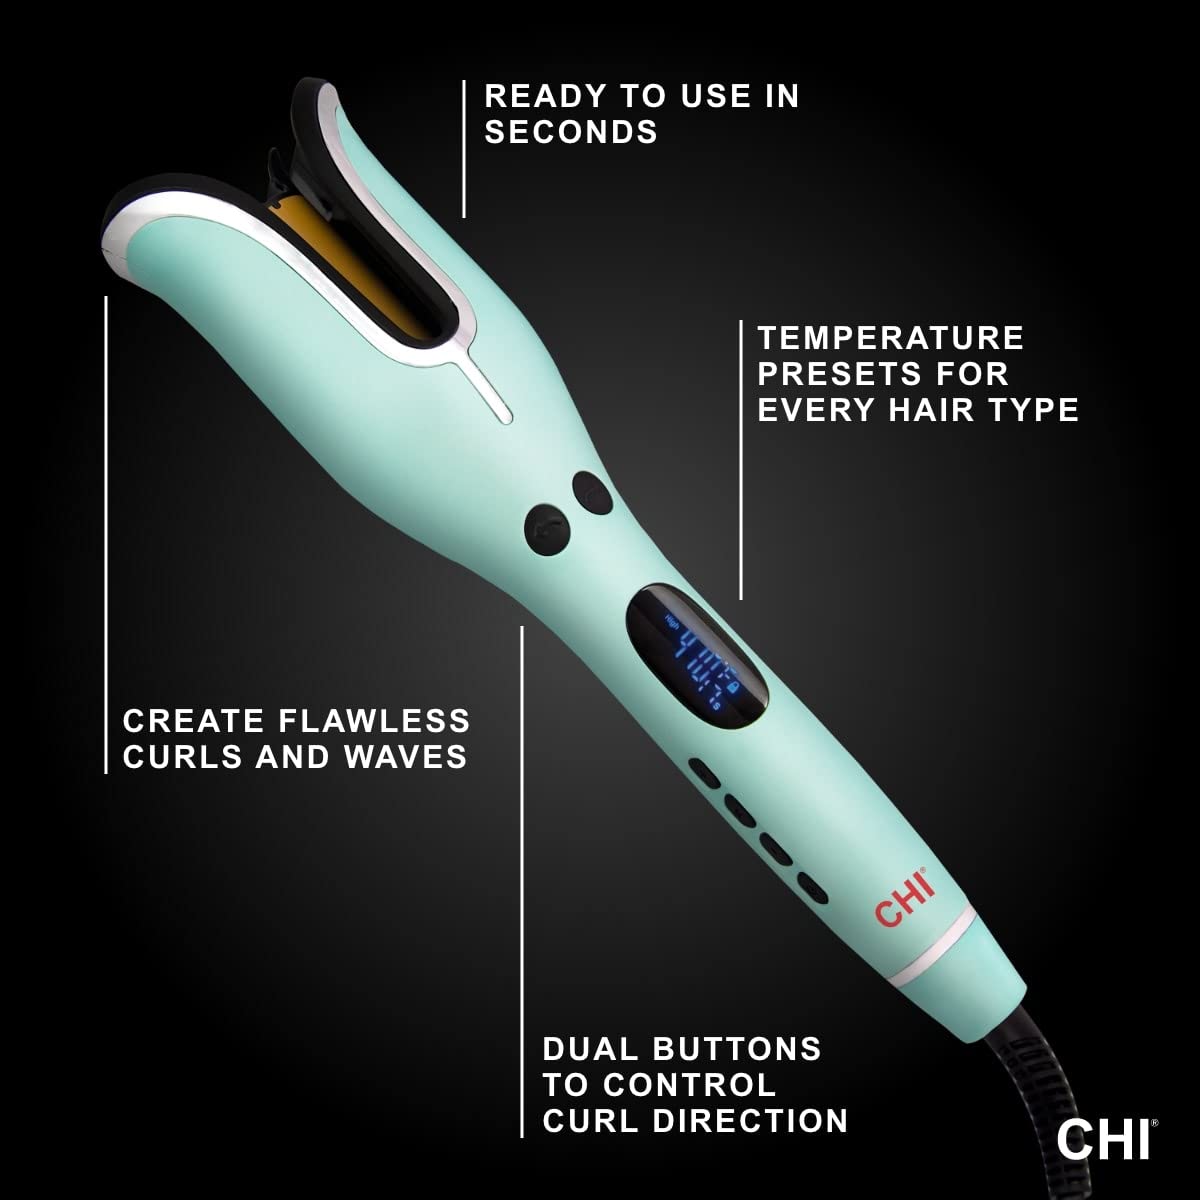 CHI Spin N Curl Special Edition - Mint Green. Ideal for Shoulder-Length Hair between 6-16” inches.